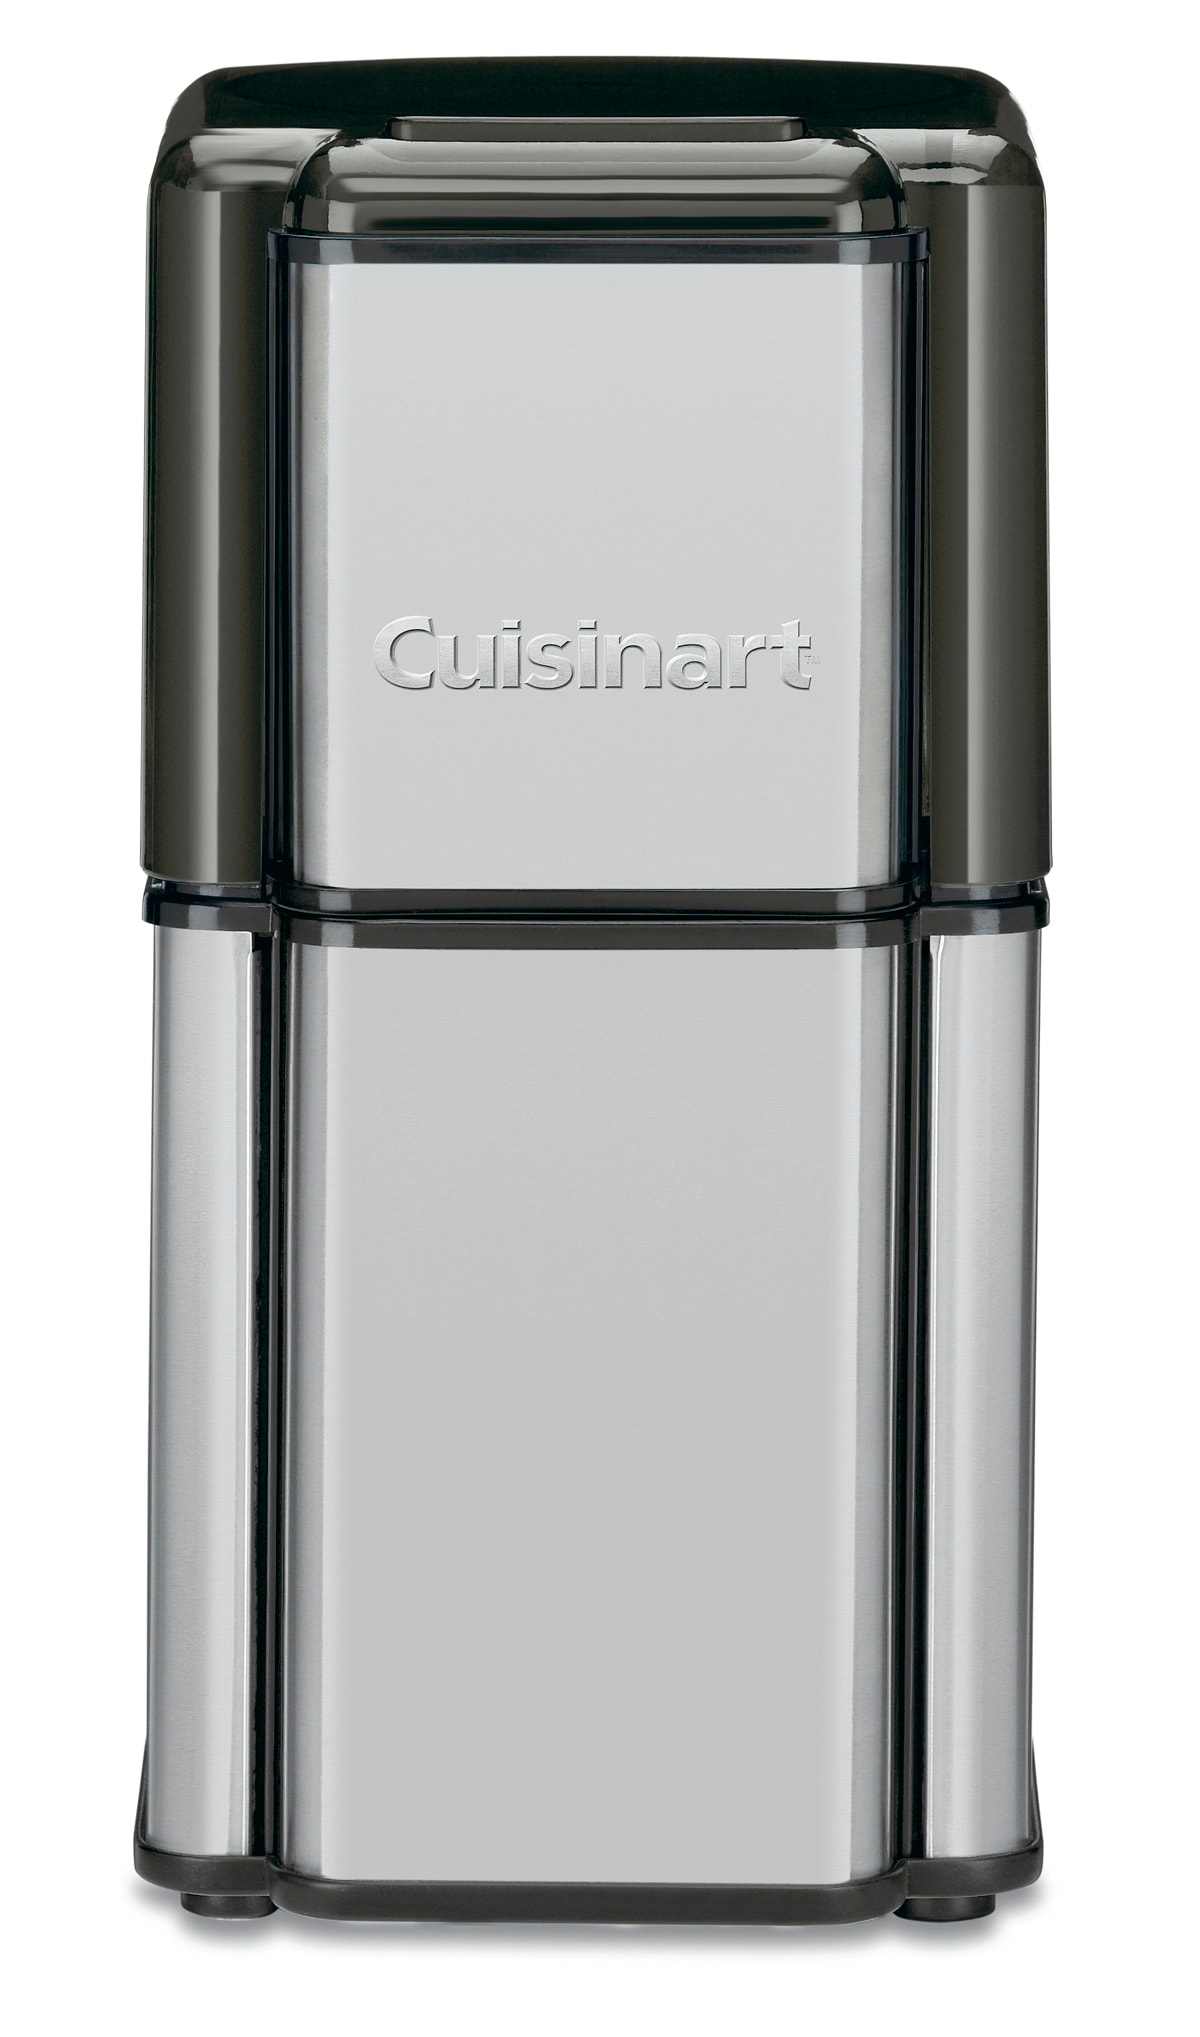 Commercial Chef Stainless Steel Electric Blade Coffee Grinder